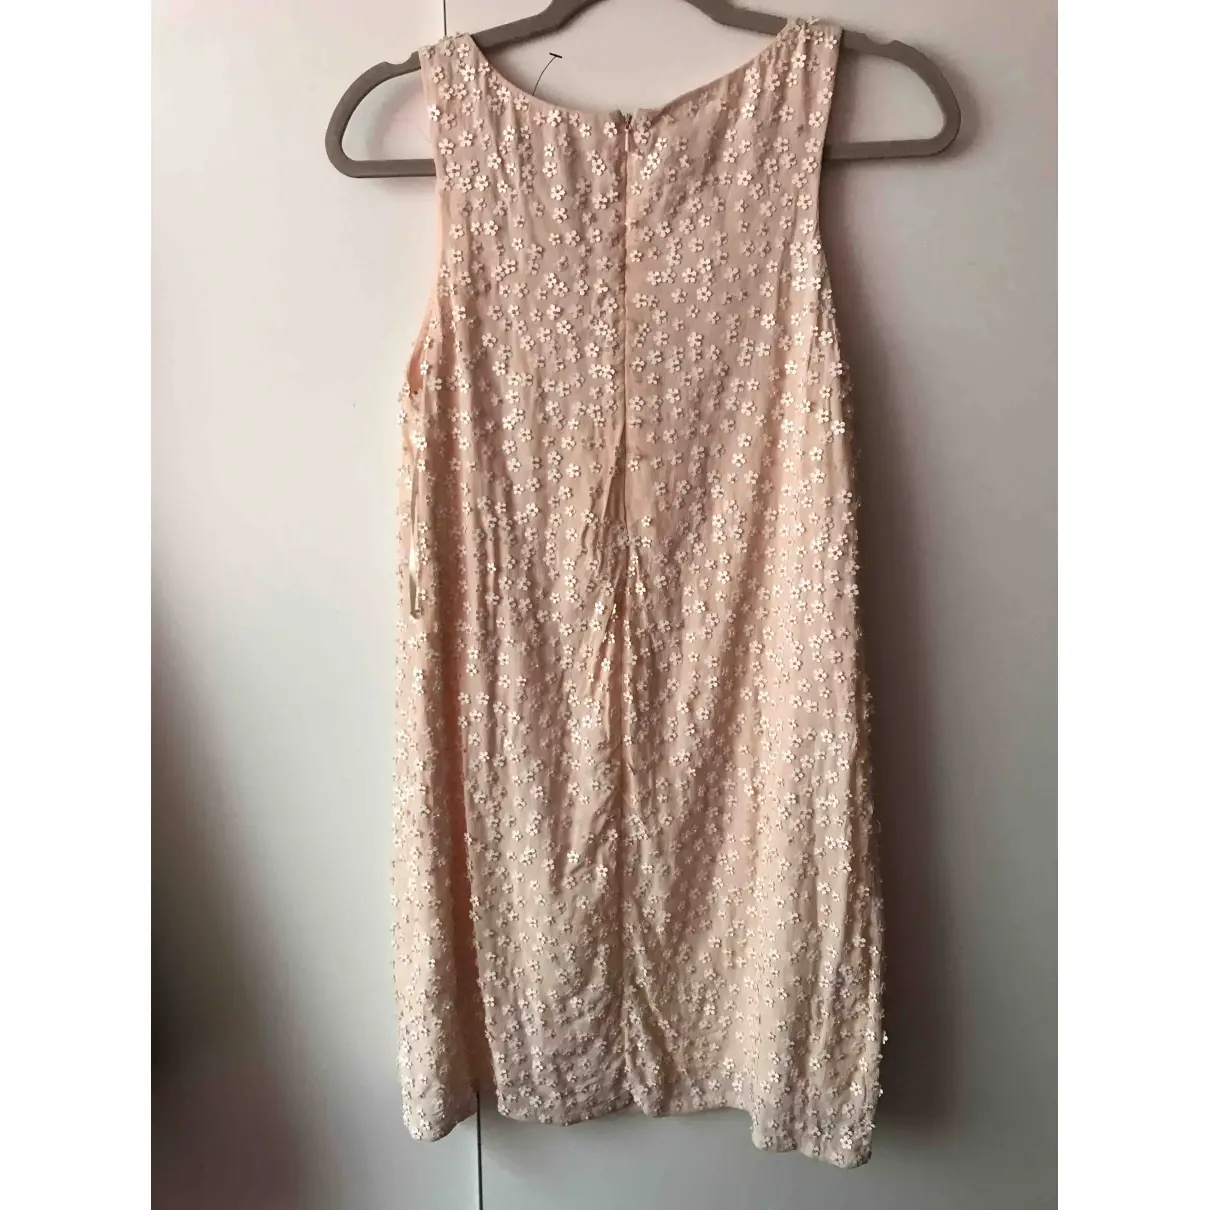 French Connection Mini dress for sale